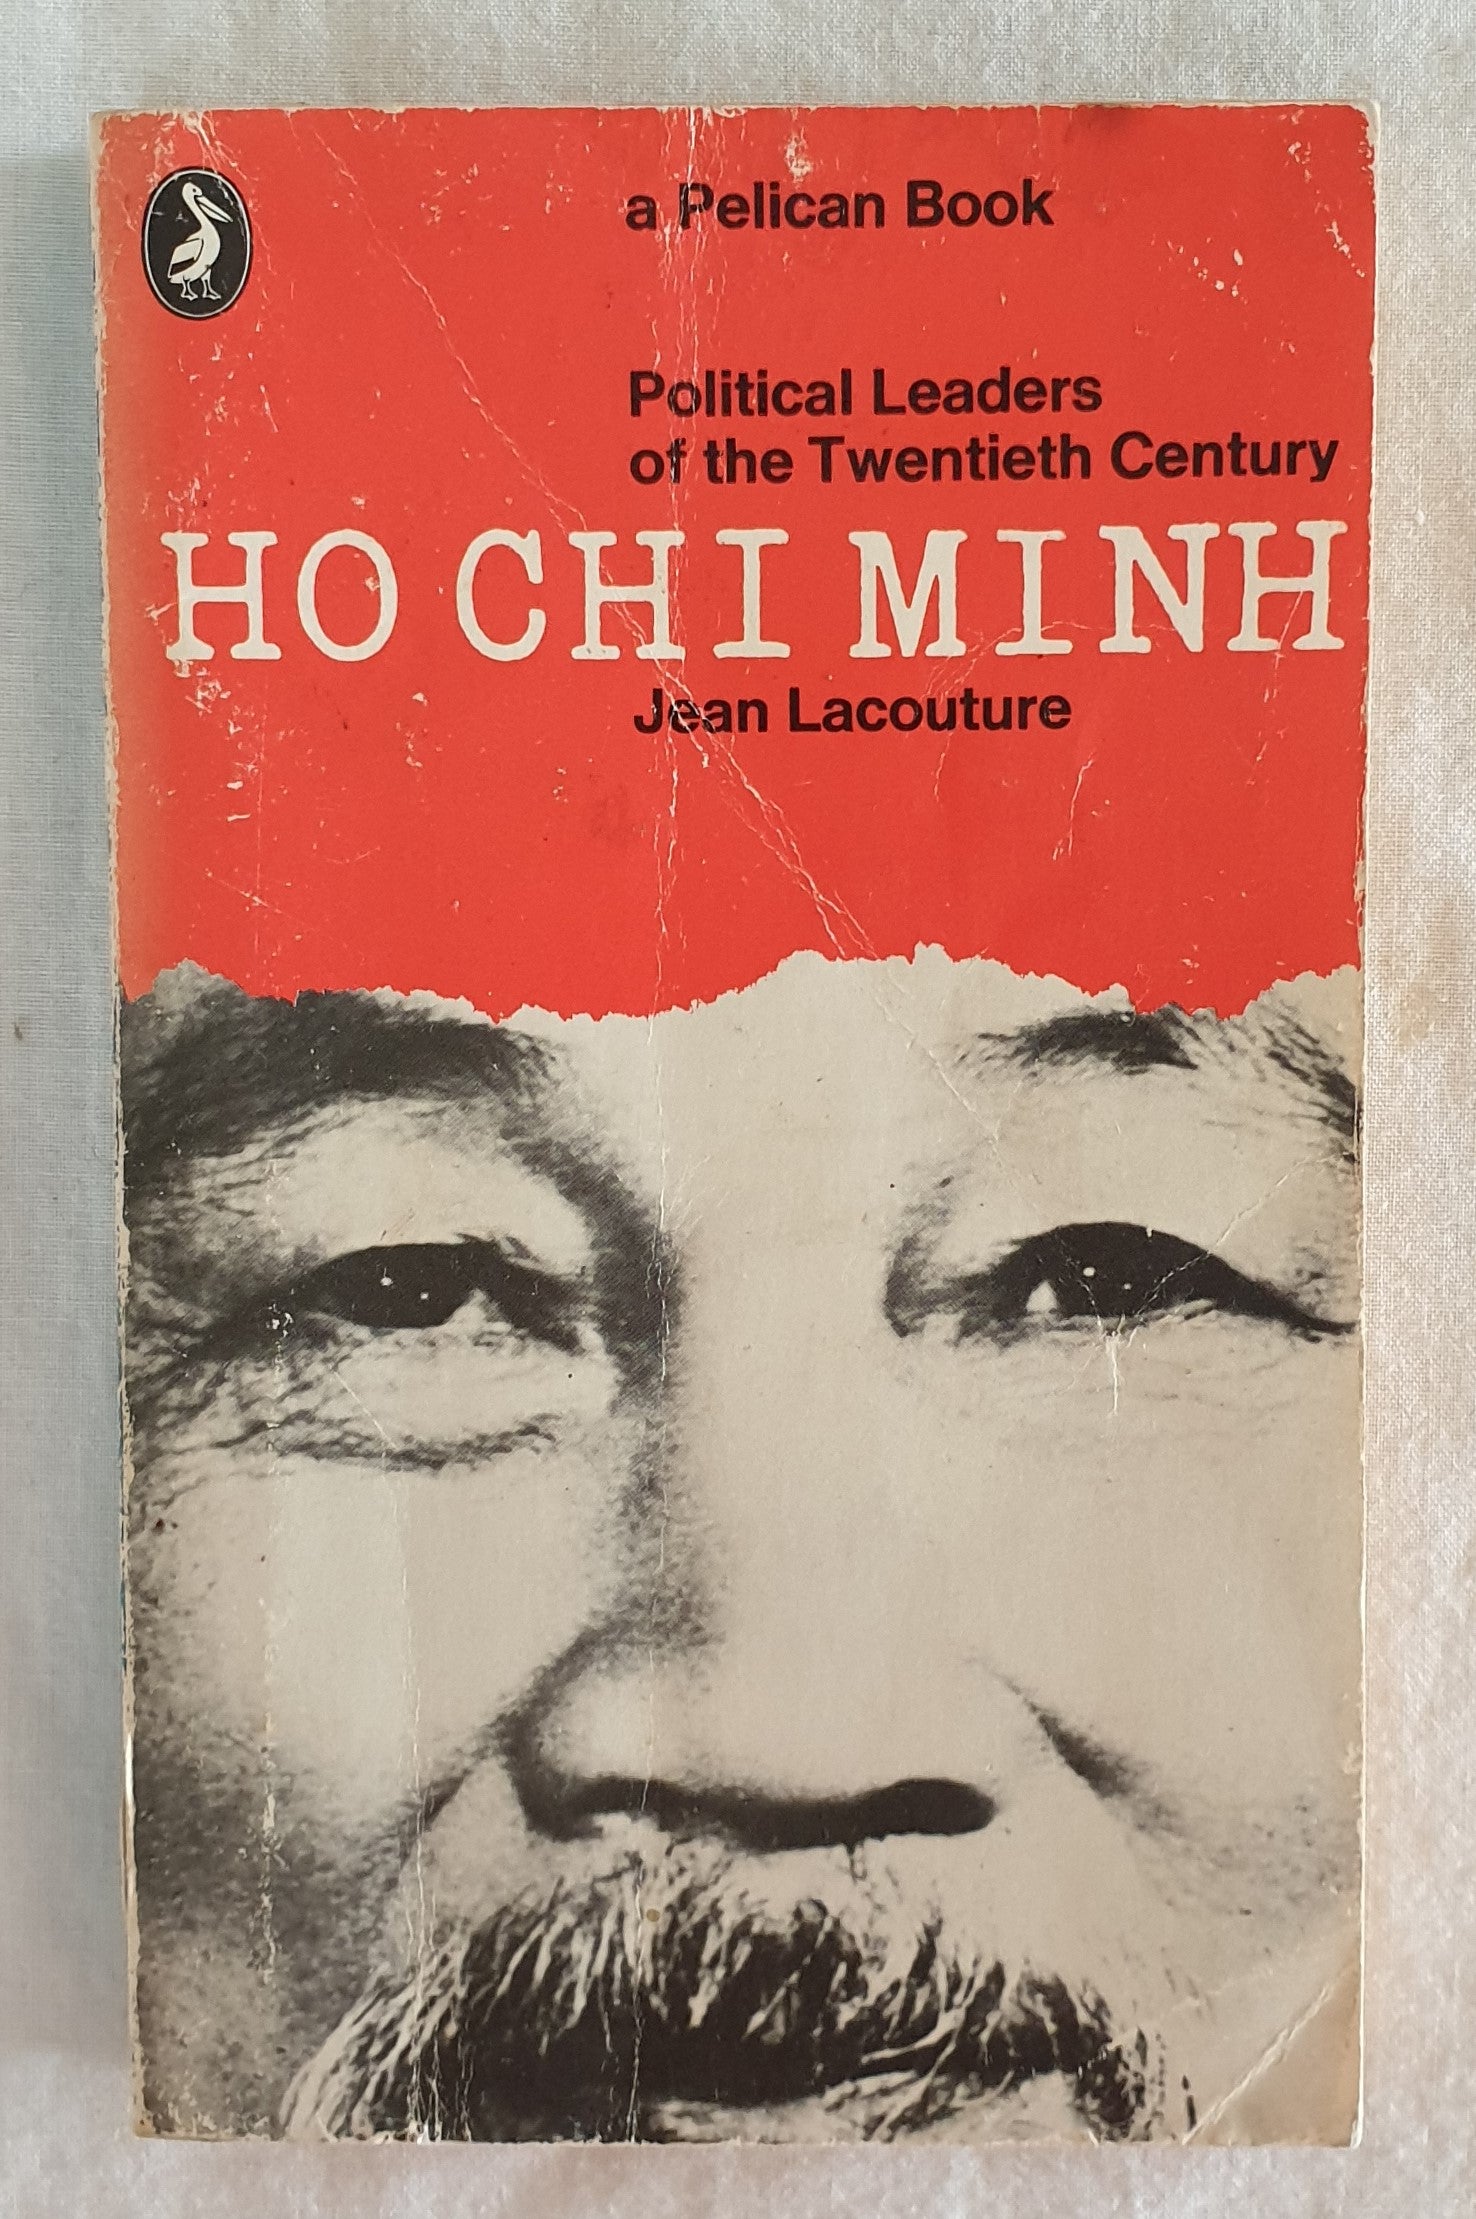 Ho Chi Minh by Jean Lacouture